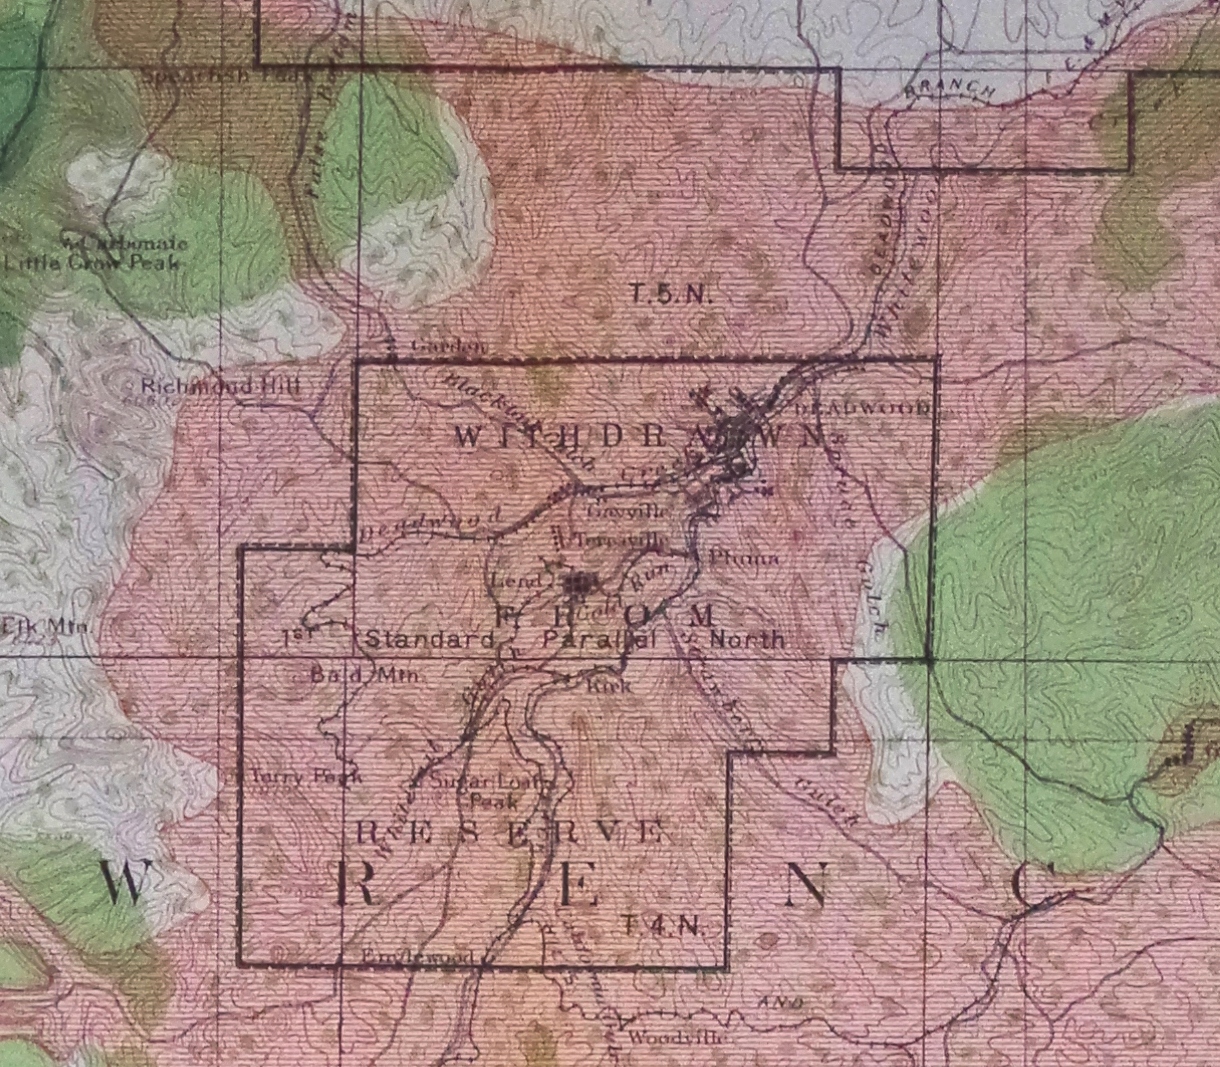 Detail of map area with black border indicating withdrawn lands